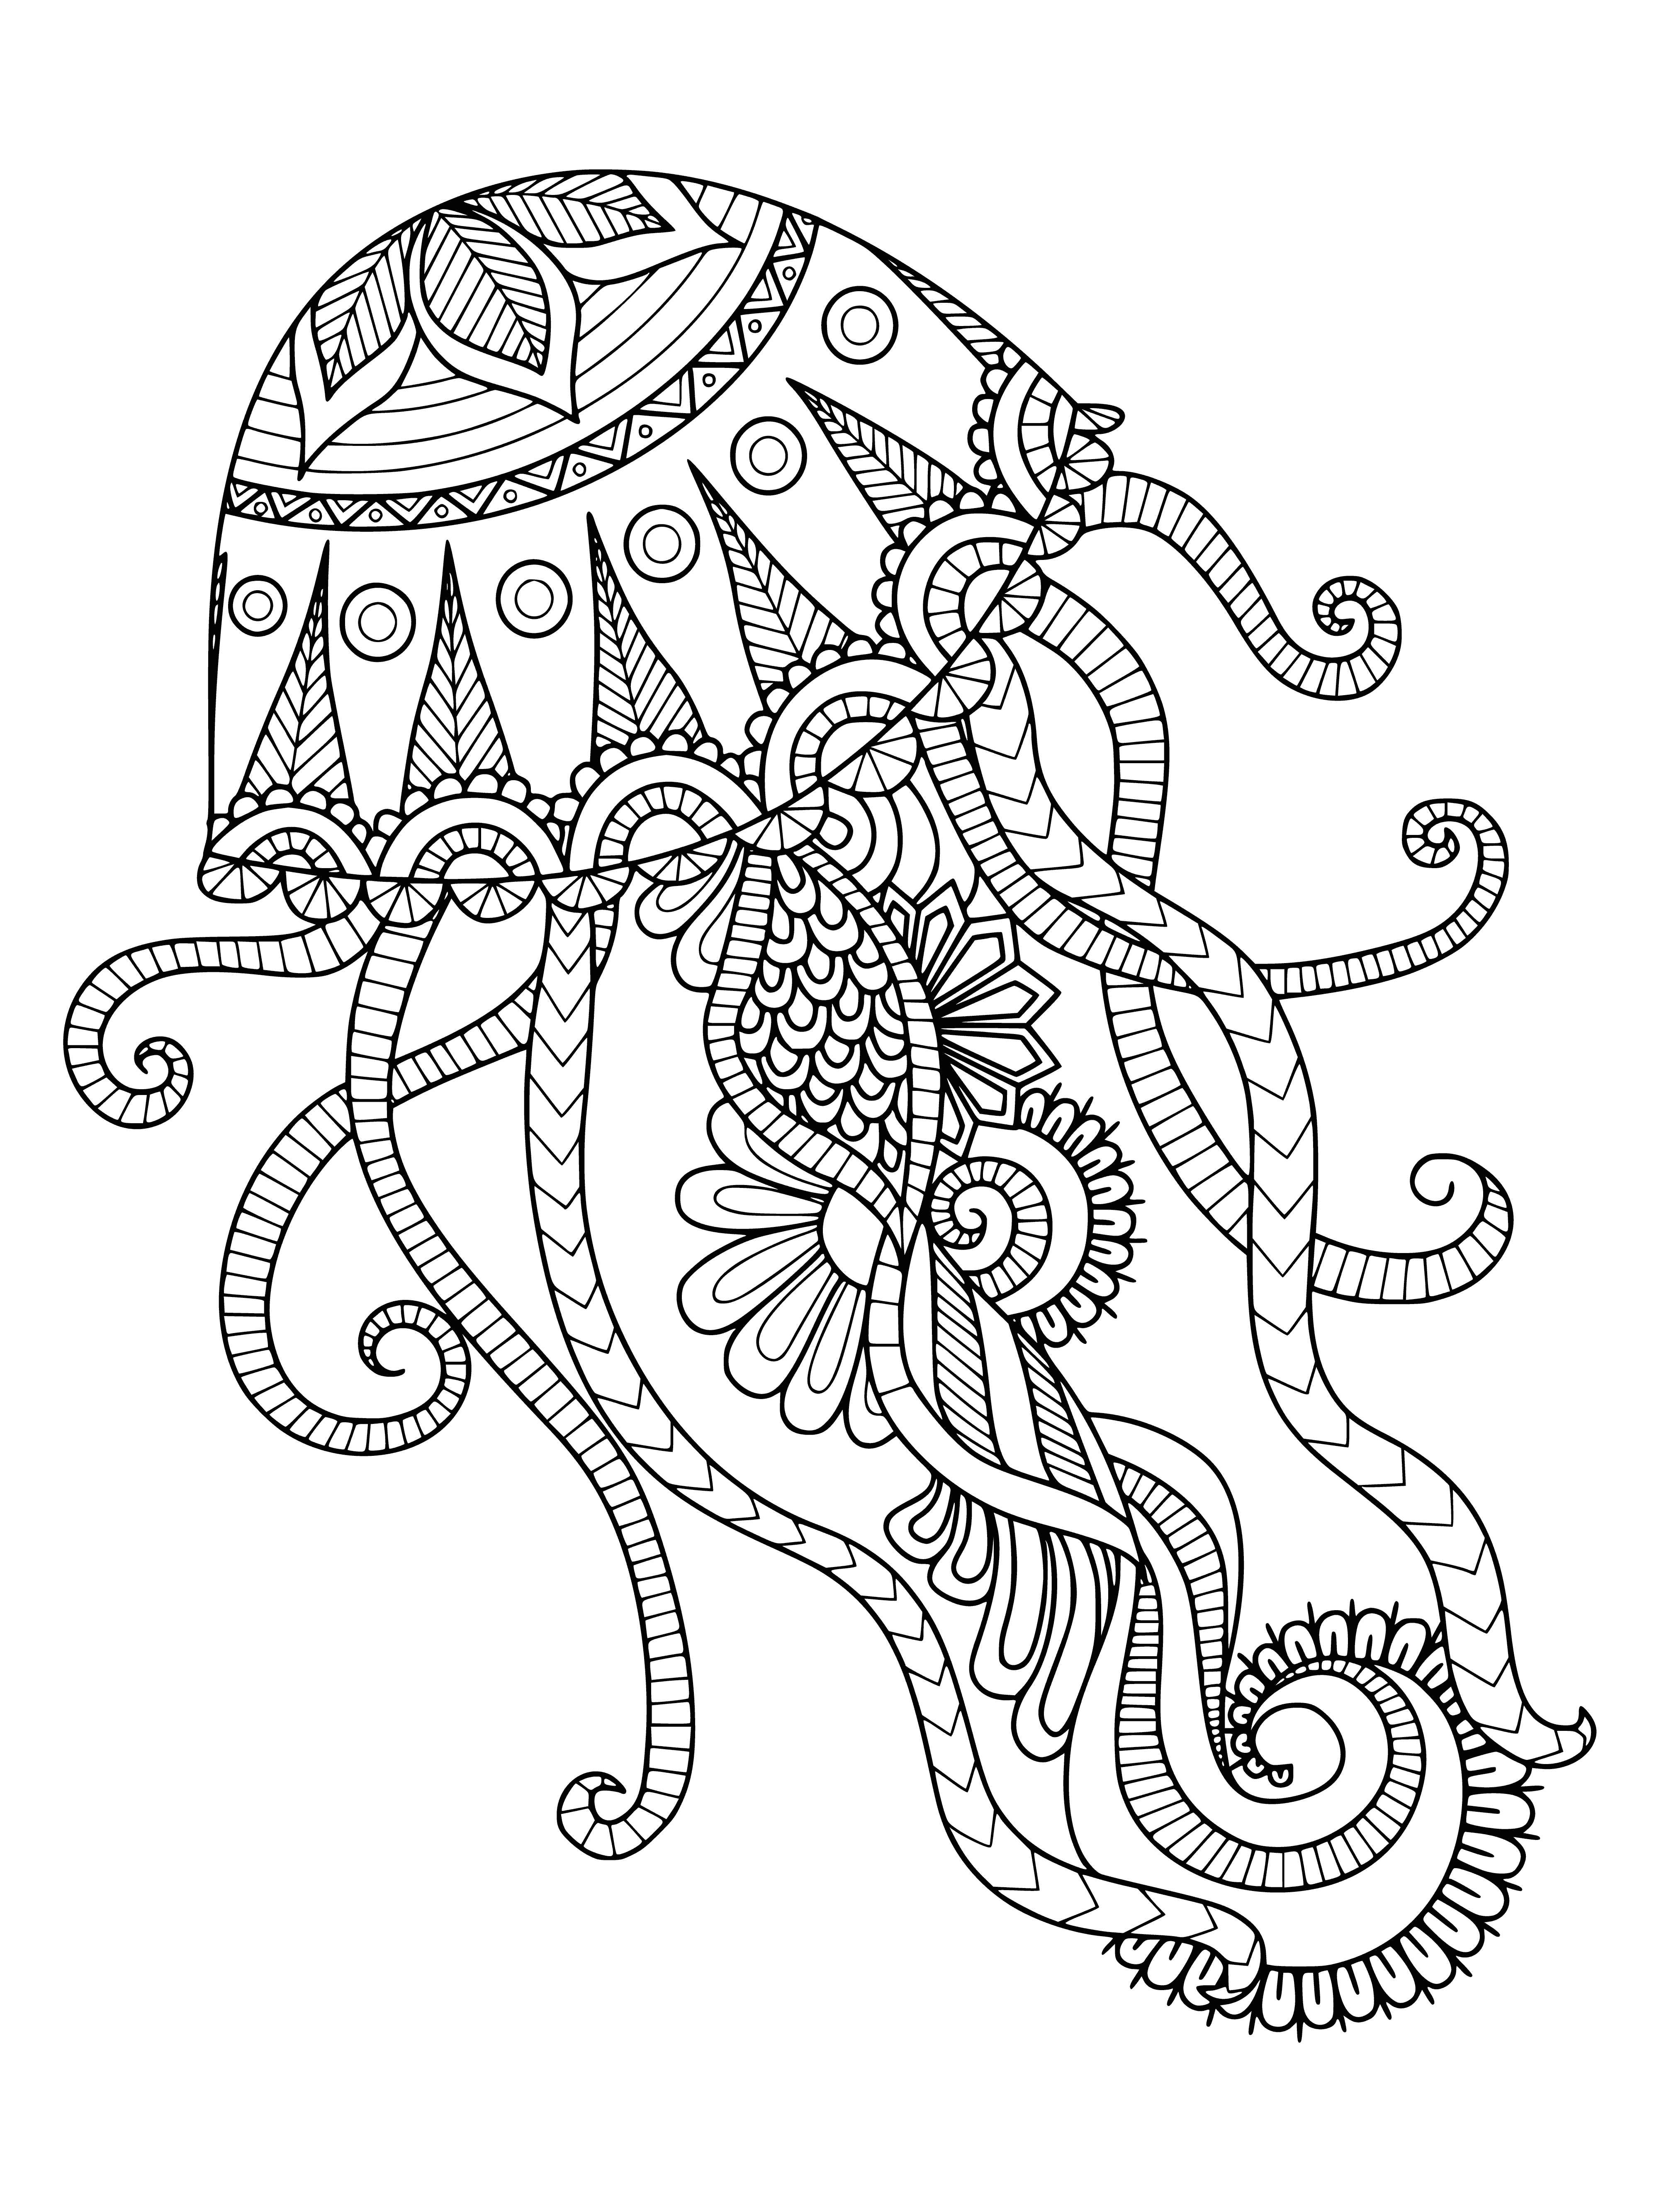 Jellyfish coloring page